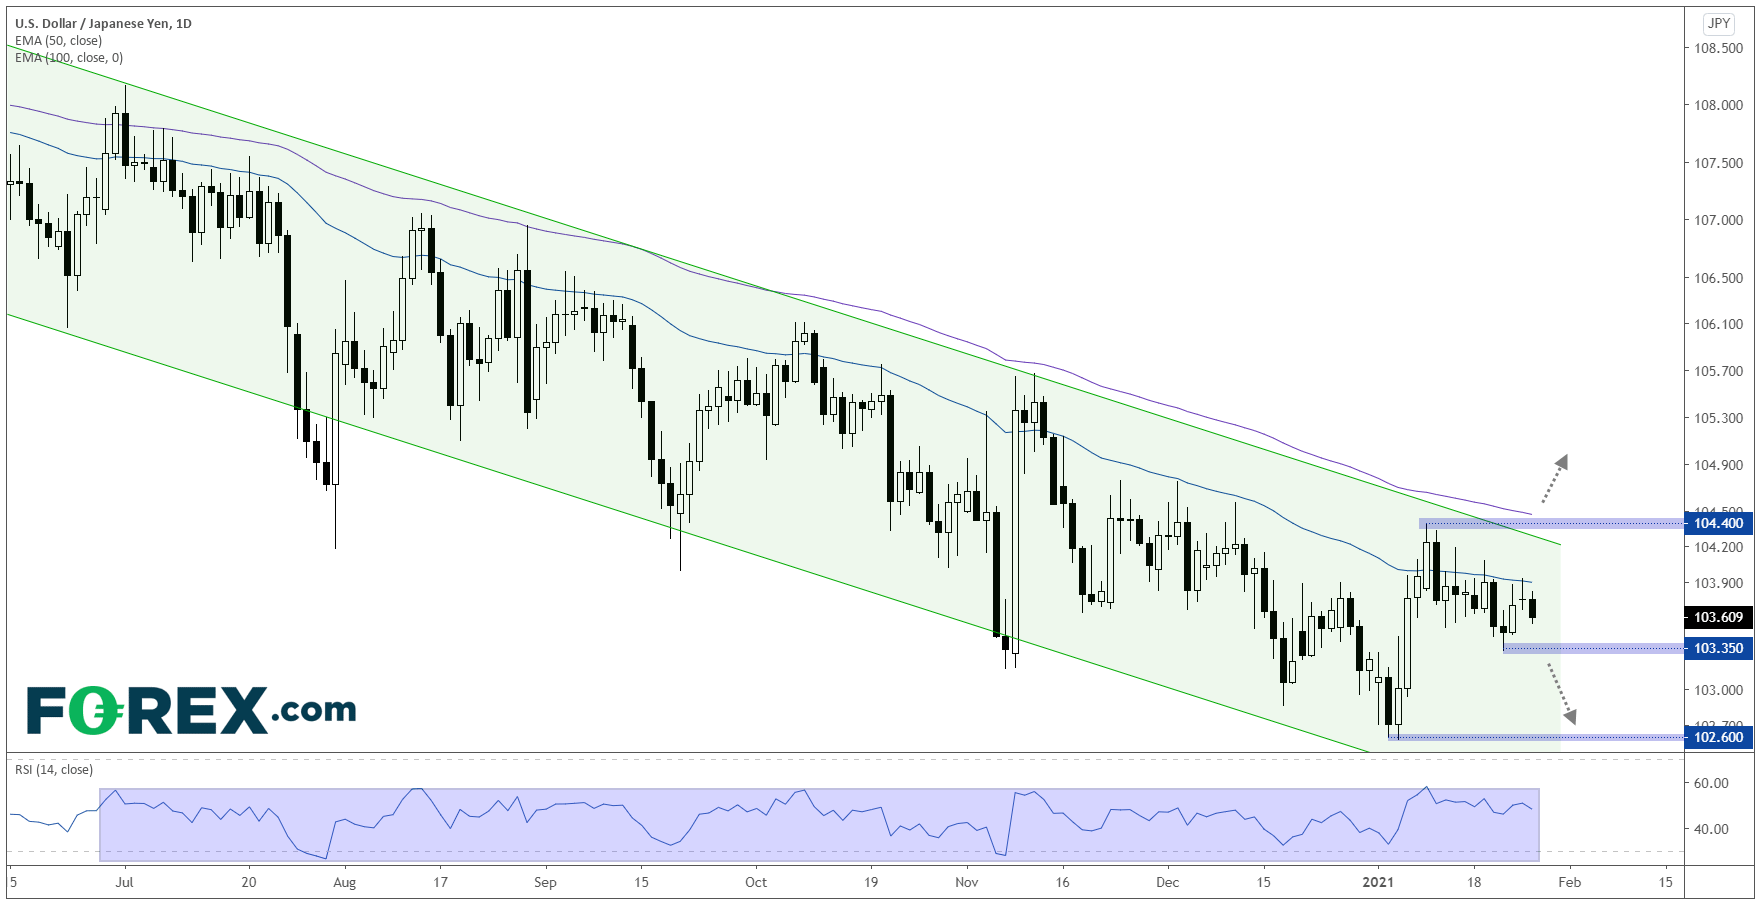 Market chart with bearish channel for USD to JPY. Published in January 2021 by FOREX.com